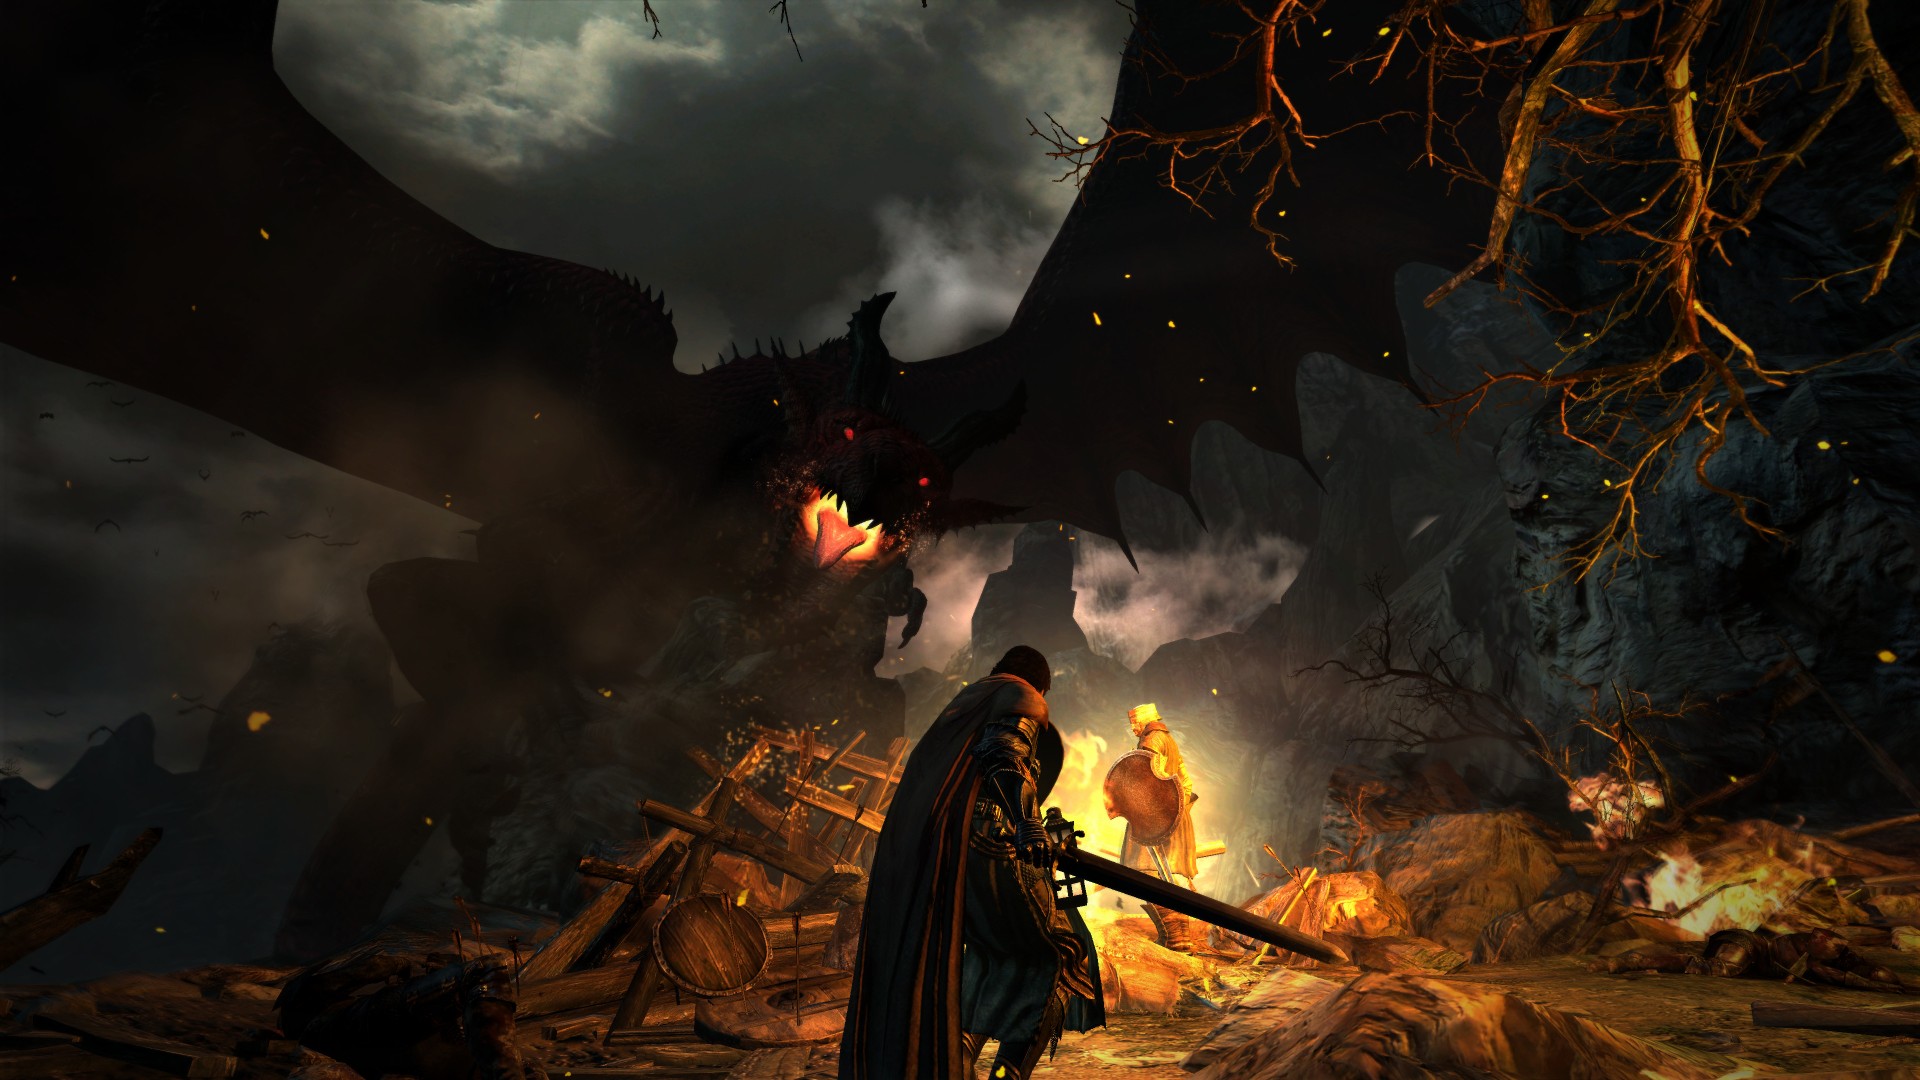 Best dragon games: Dragon's Dogma: Dark Arisen. Image shows a dragon approaching people at a camp fire in the dark.